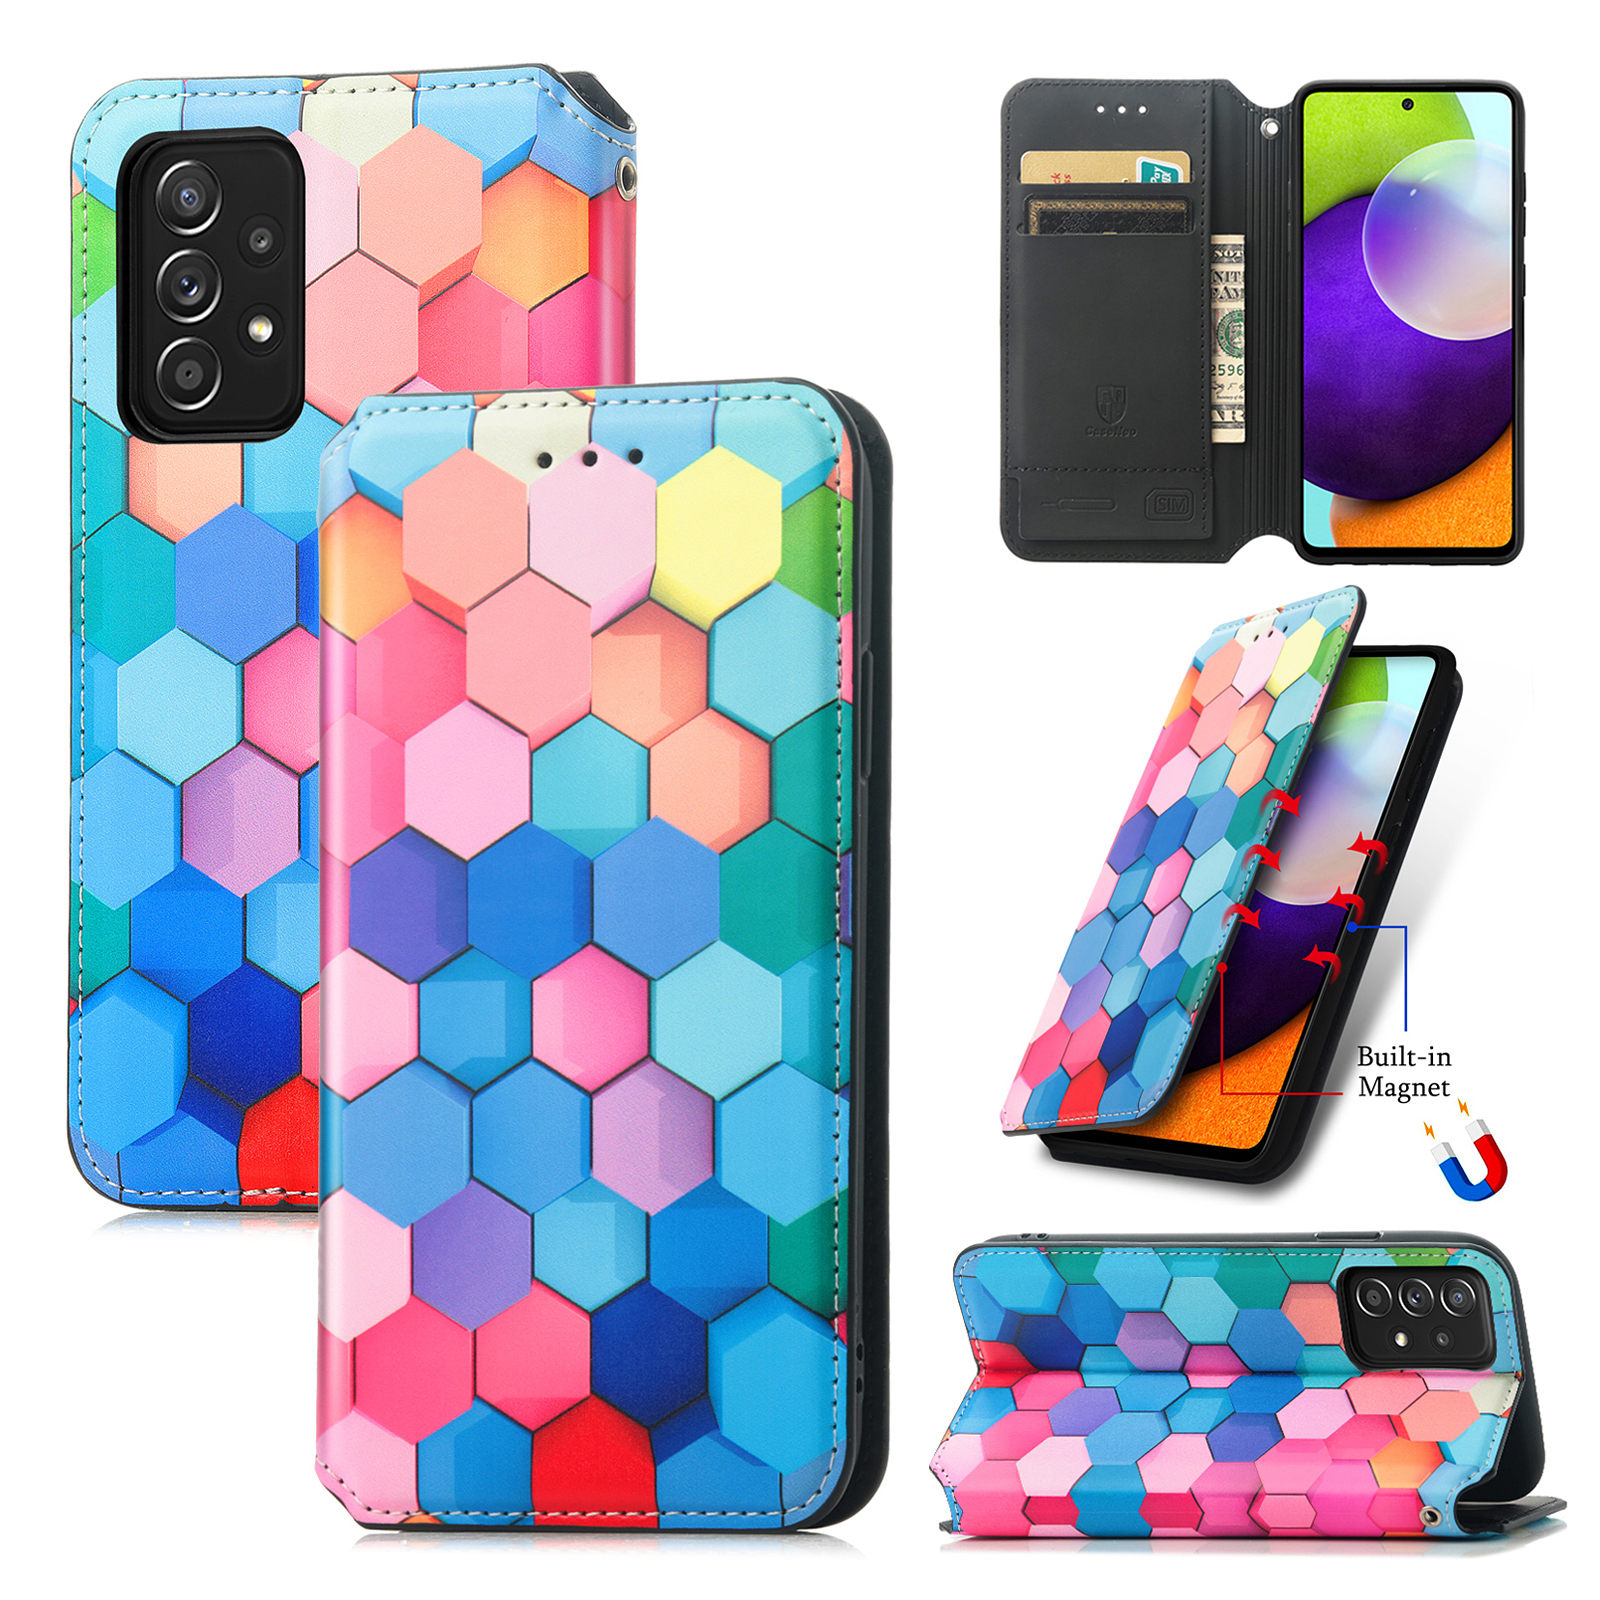 Case for Samsung Galaxy S21 Case, Galaxy S21 Case Wallet Case PU Leather and Hard PC RFID Blocking Slim Durable Protective Phone Case Cover For Samsung Galaxy S21,Rainbow Cube - image 1 of 9